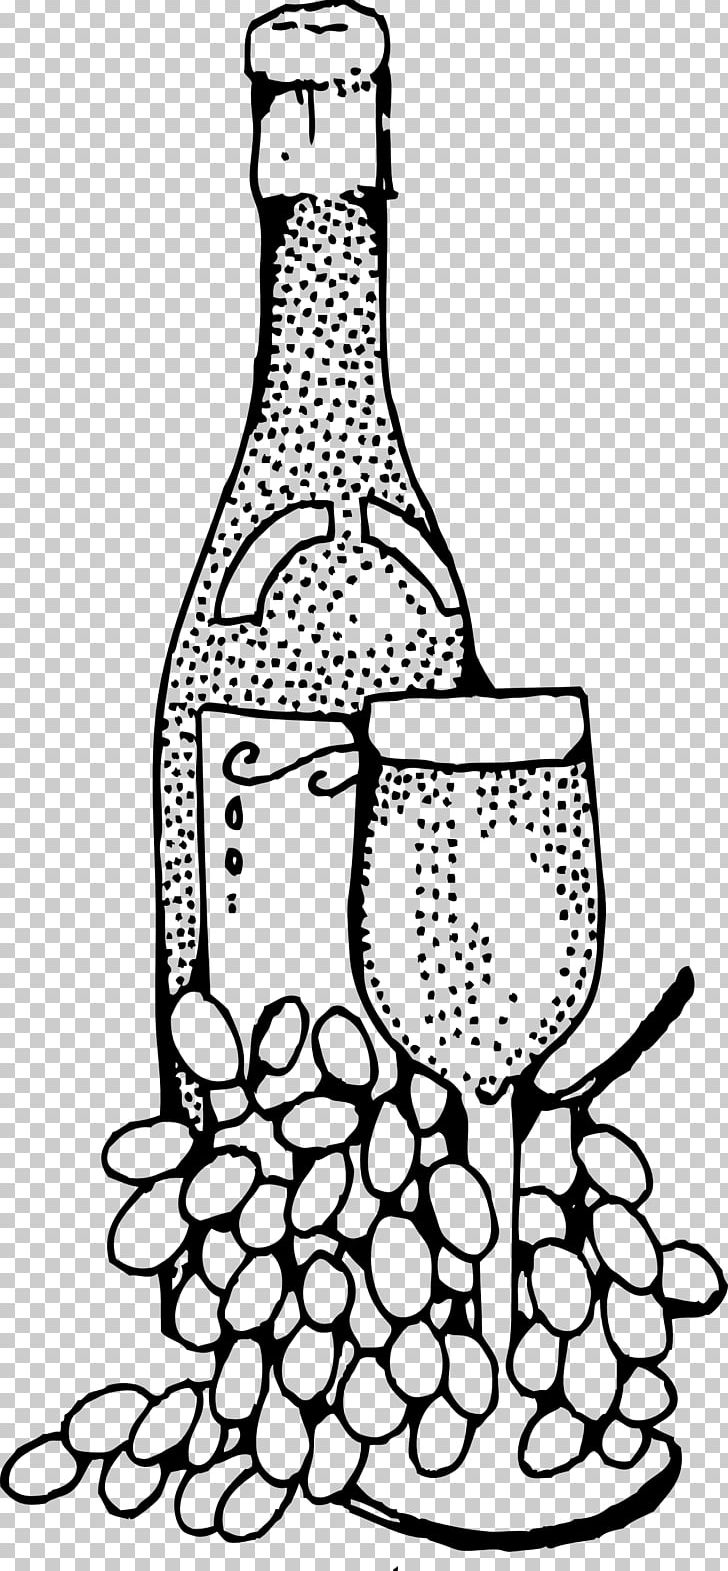 Wine Bottle Ready-to-Use Food And Drink Spot Illustrations PNG, Clipart, Beer, Black And White, Bottle, Drawing, Drinkware Free PNG Download